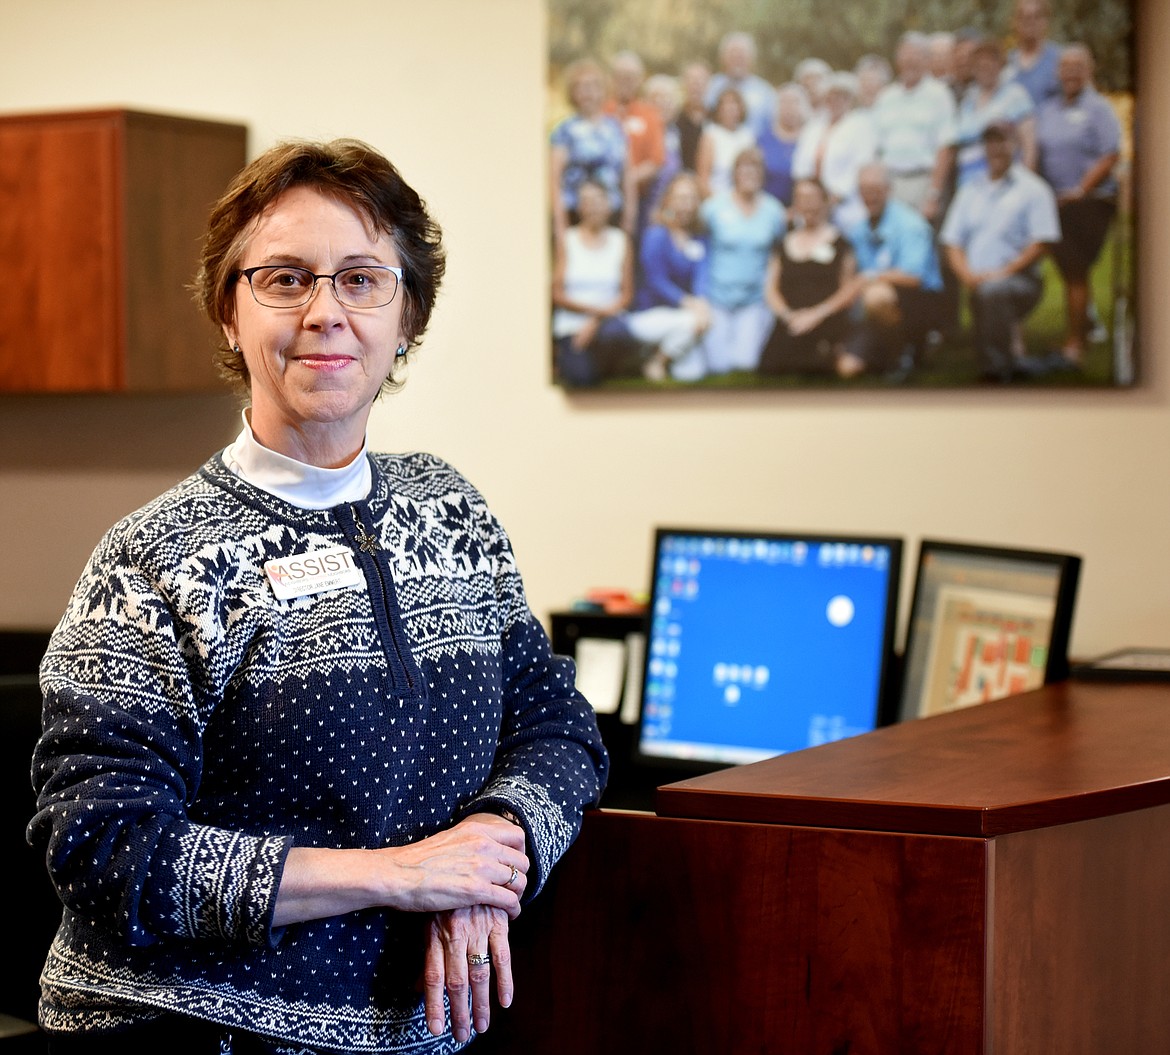 Jane Emmert is the director at ASSIST in Kalispell. In the background is a group photo of ASSIST volunteers.